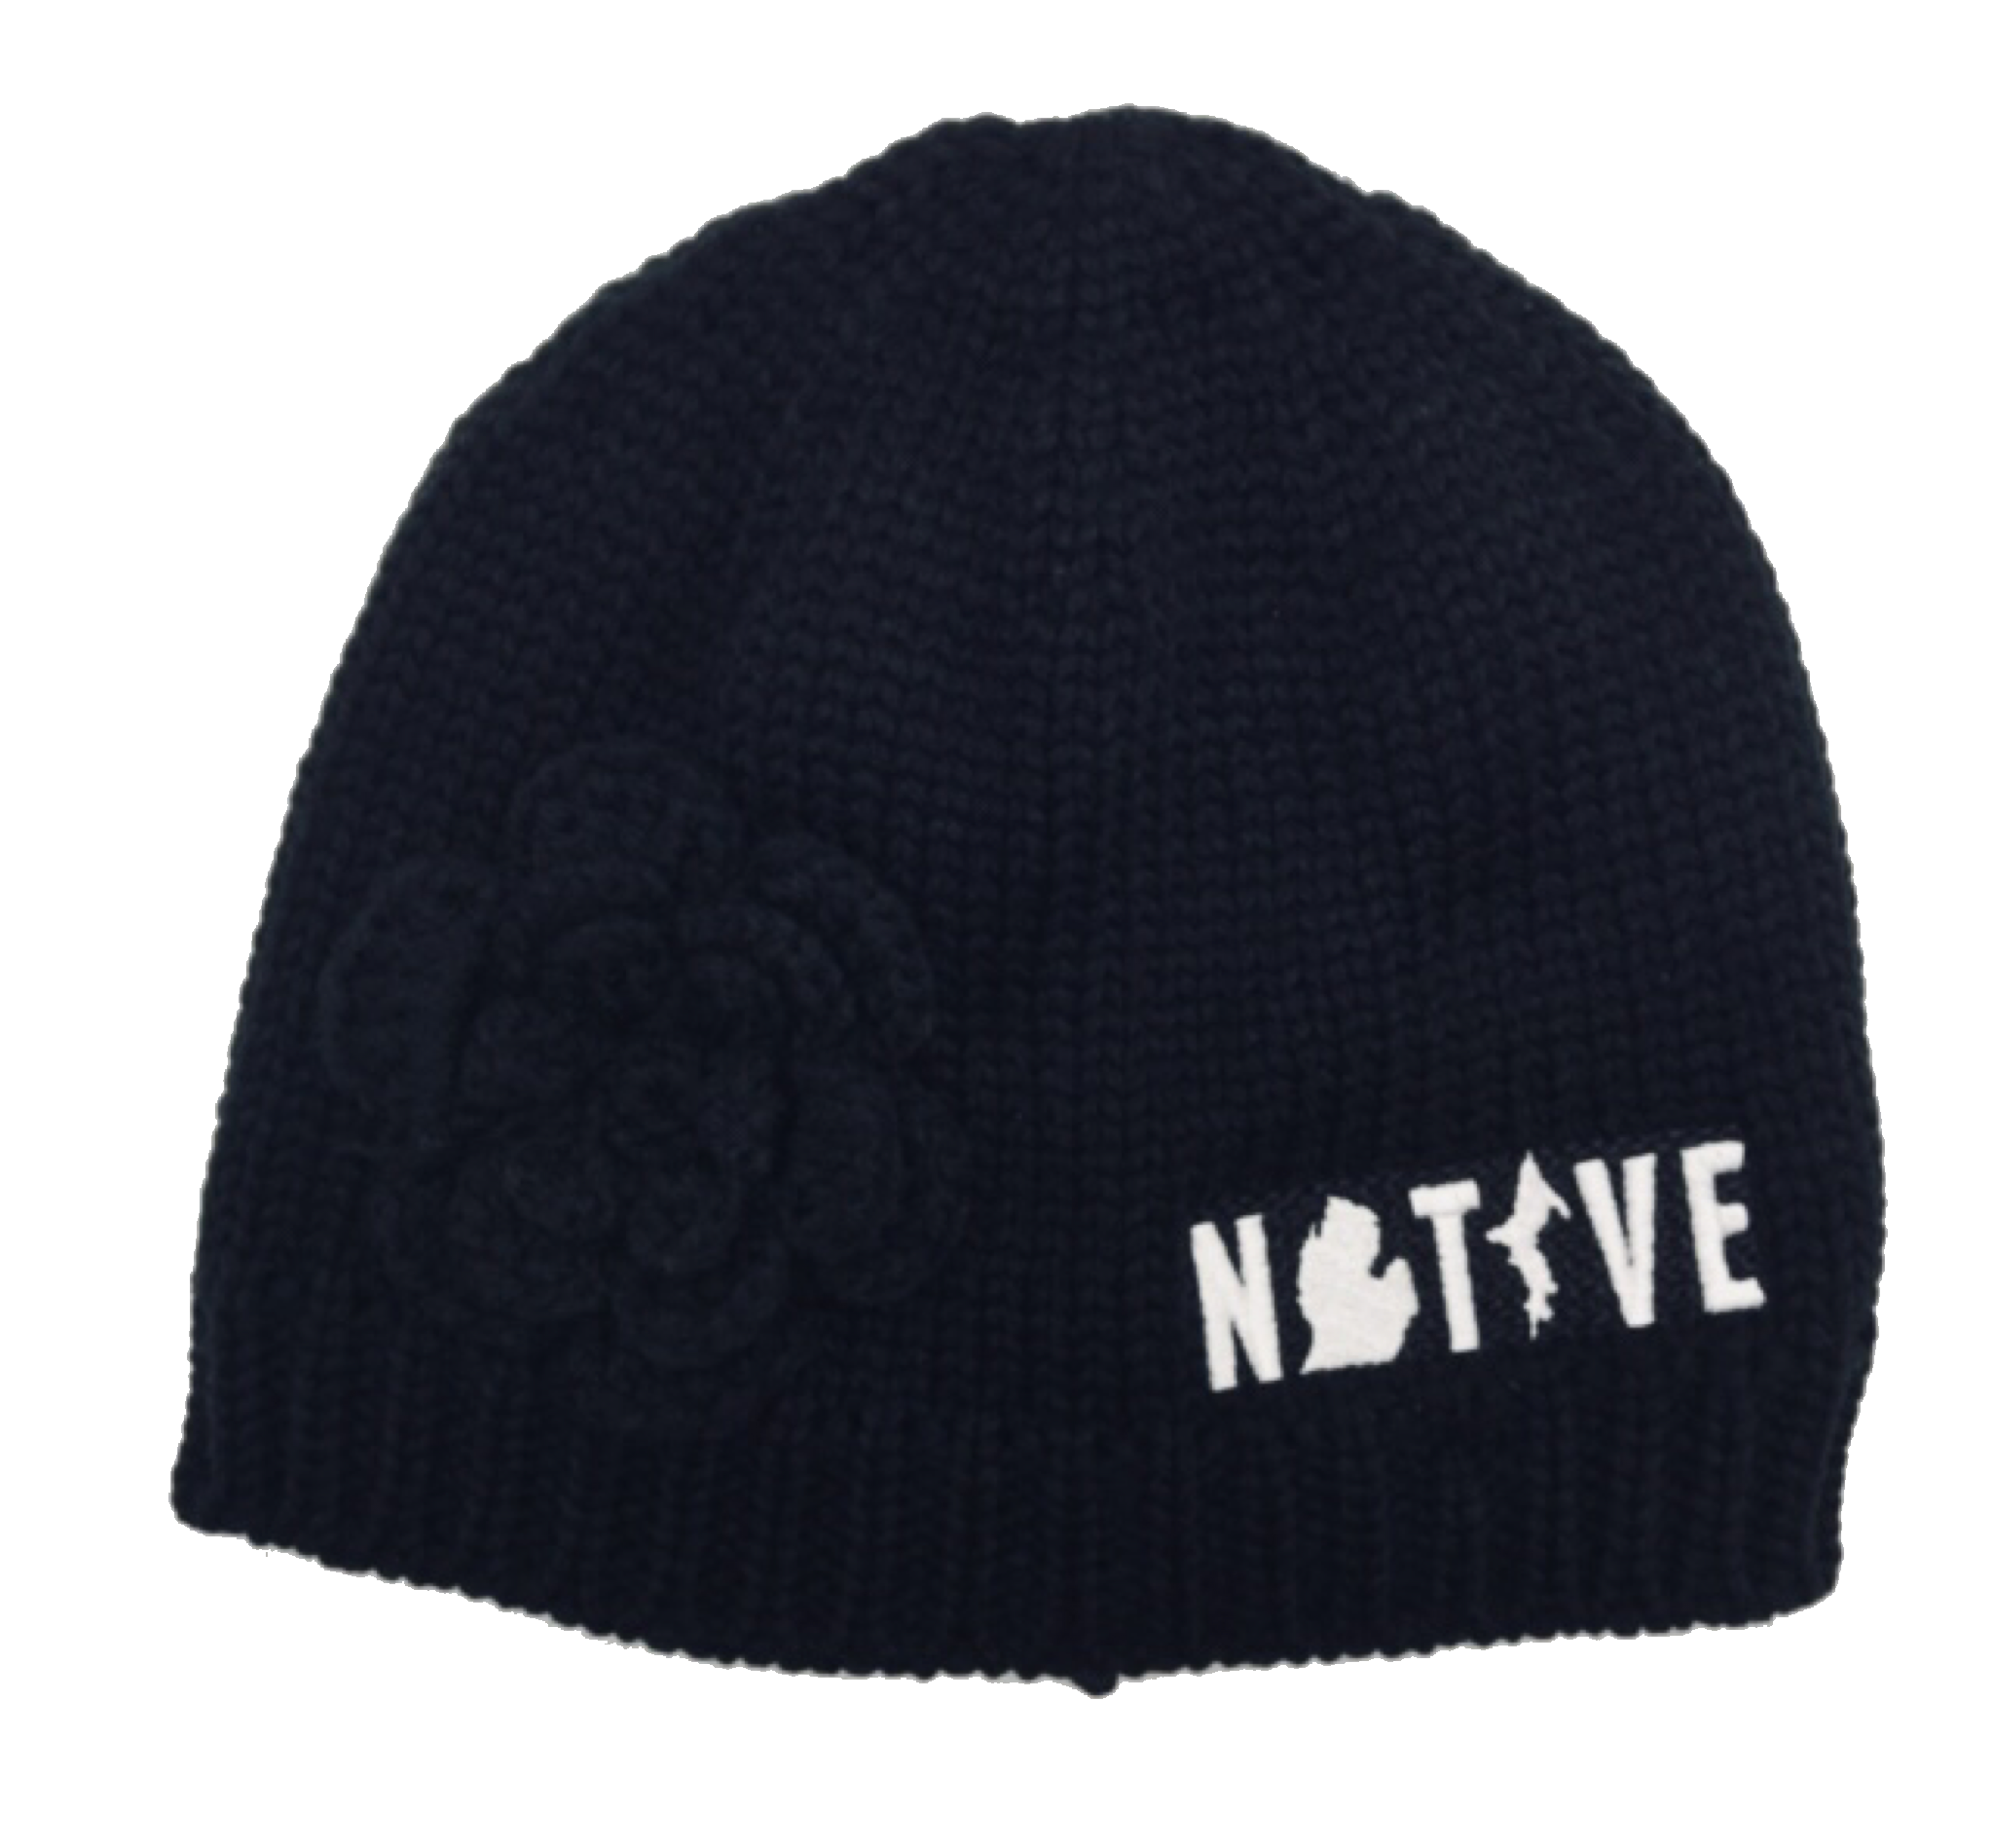 Hat - Michigan Native Knit with flower - Black